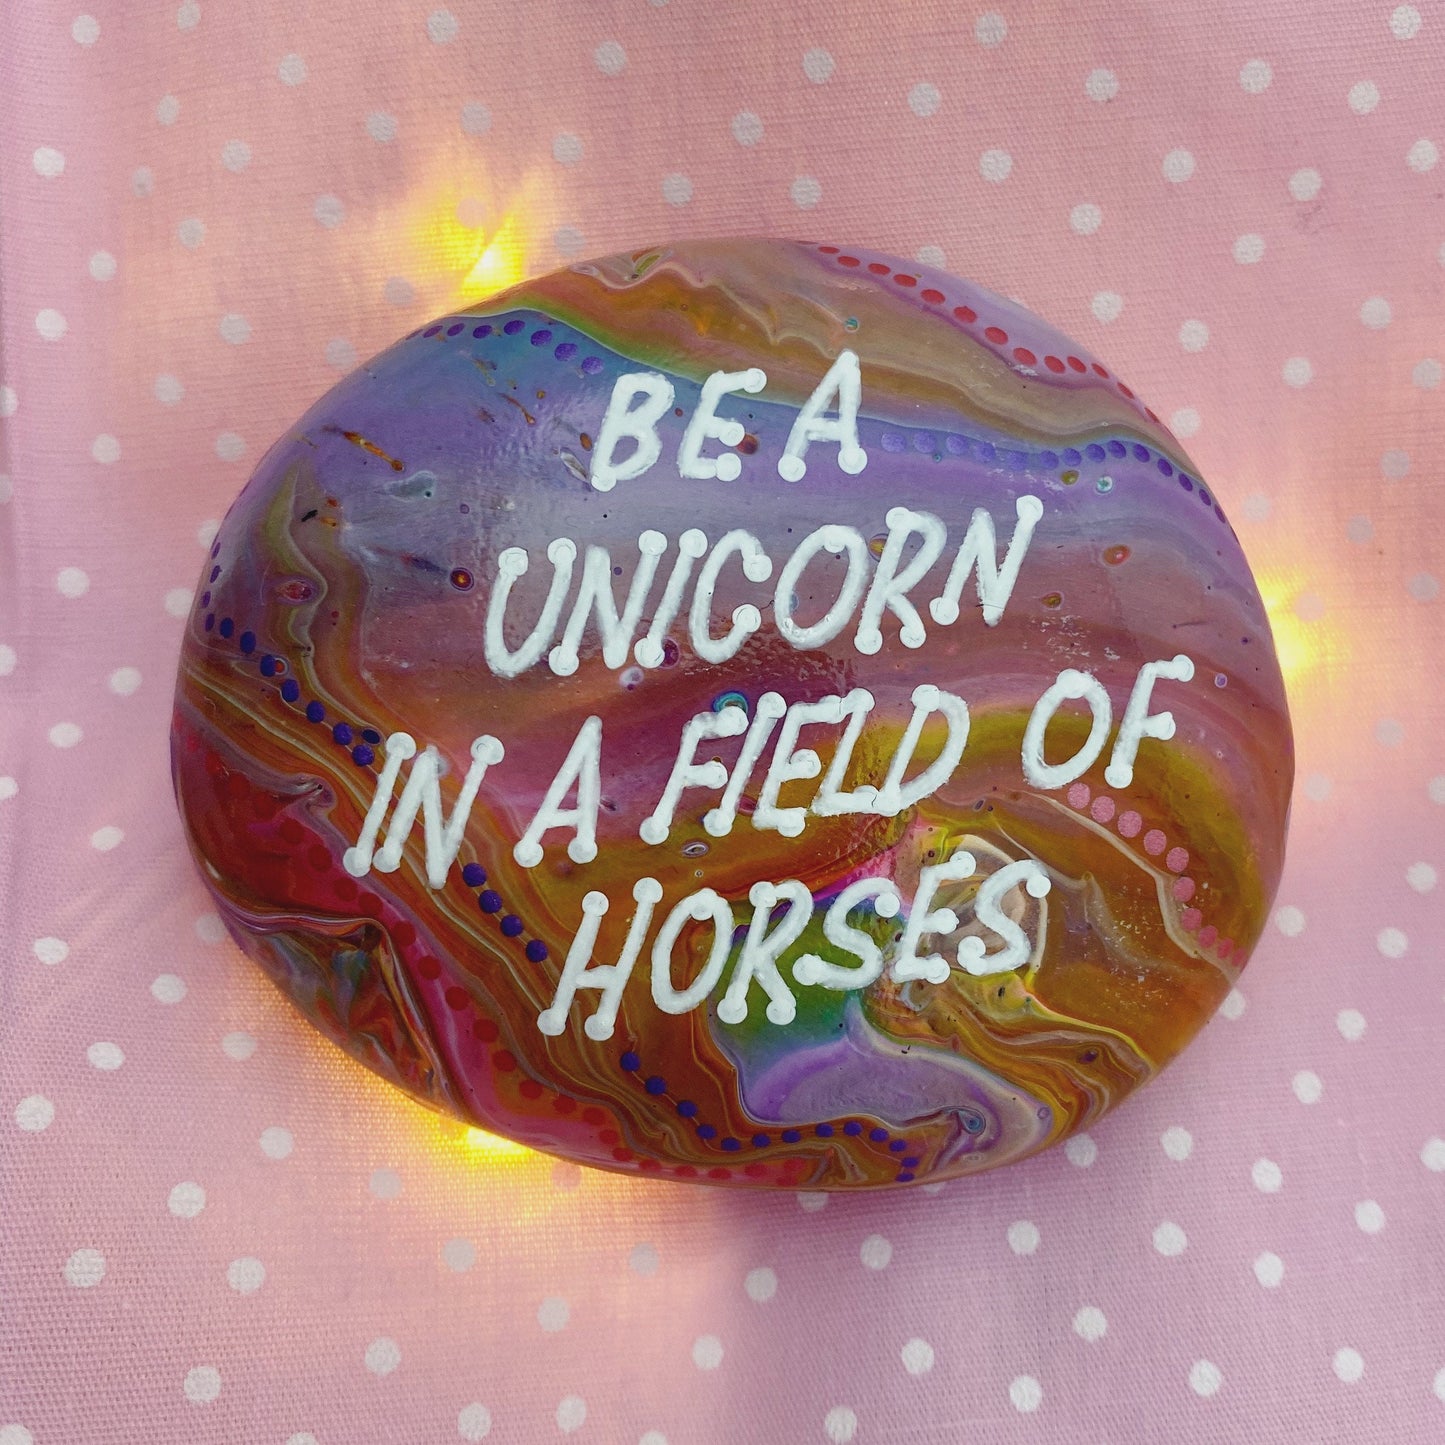 Colourful Hand painted Stone with the words Be A Unicorn in a Field of Horses